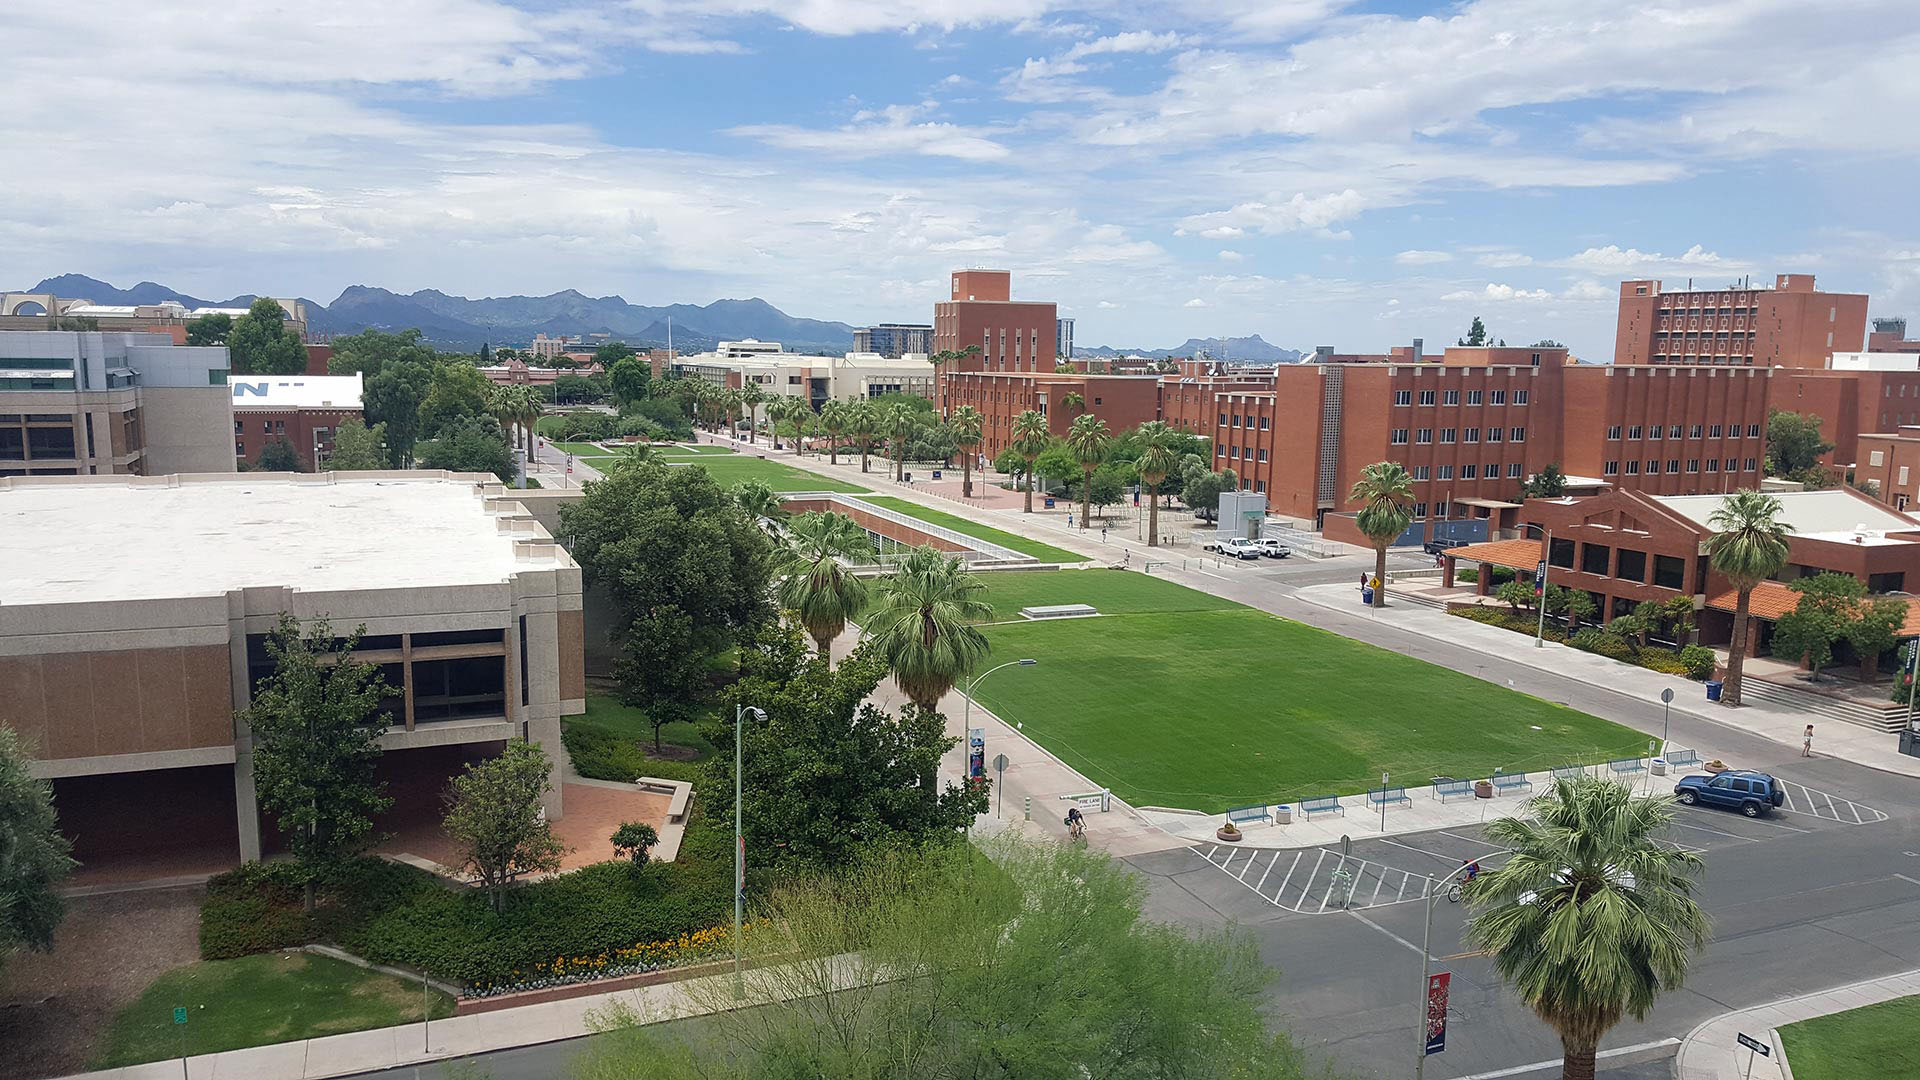 UA shifting to more renewable energy with TEP deal